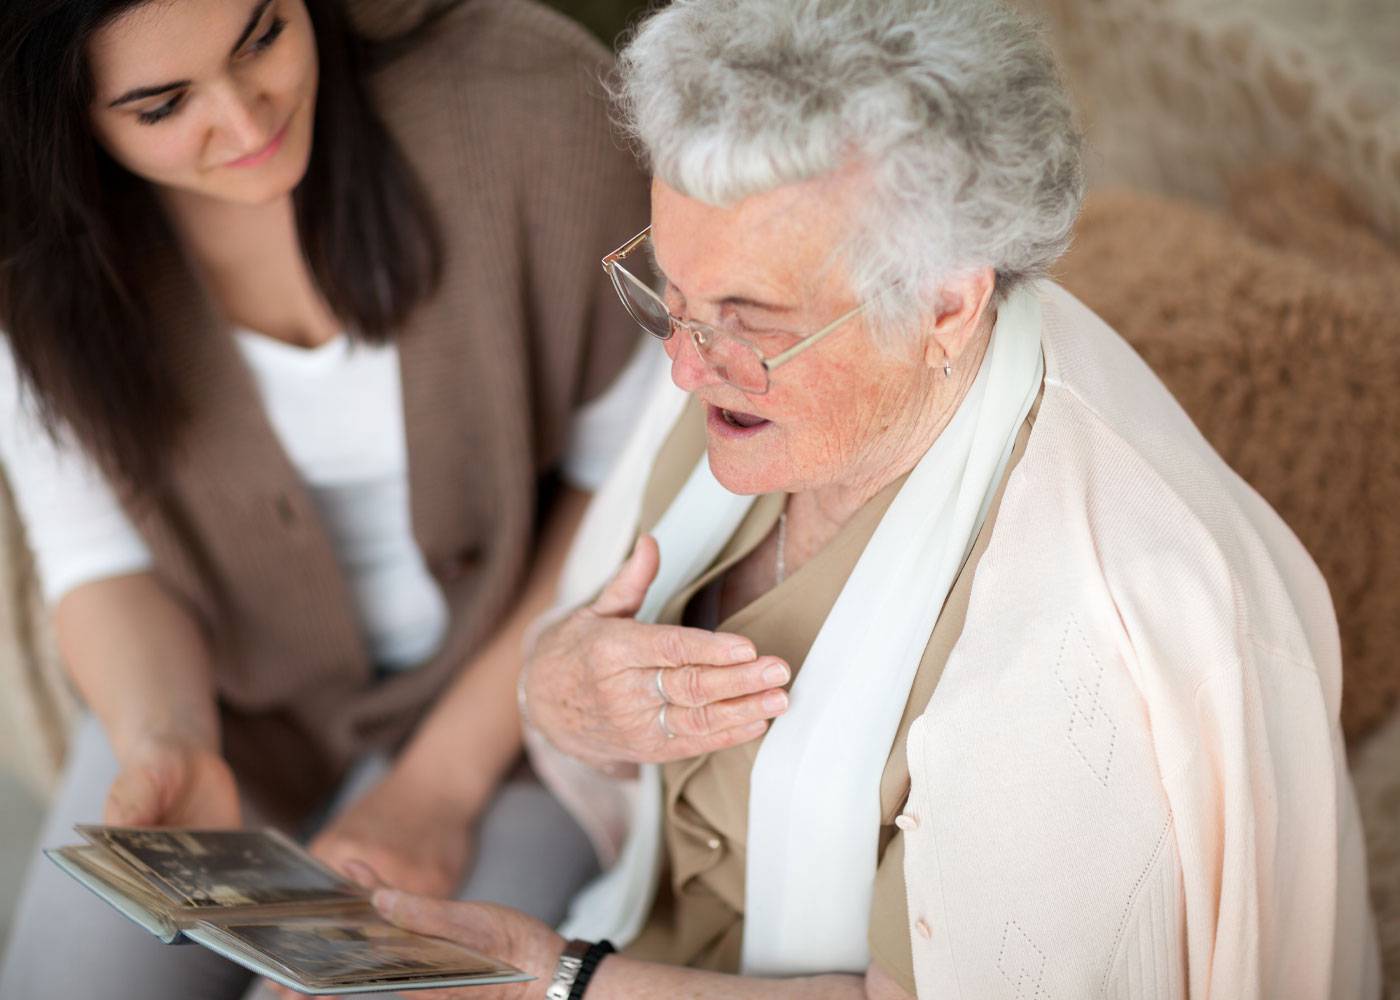 Older woman smiling, looking at photographs, younger daughter smiling next to her